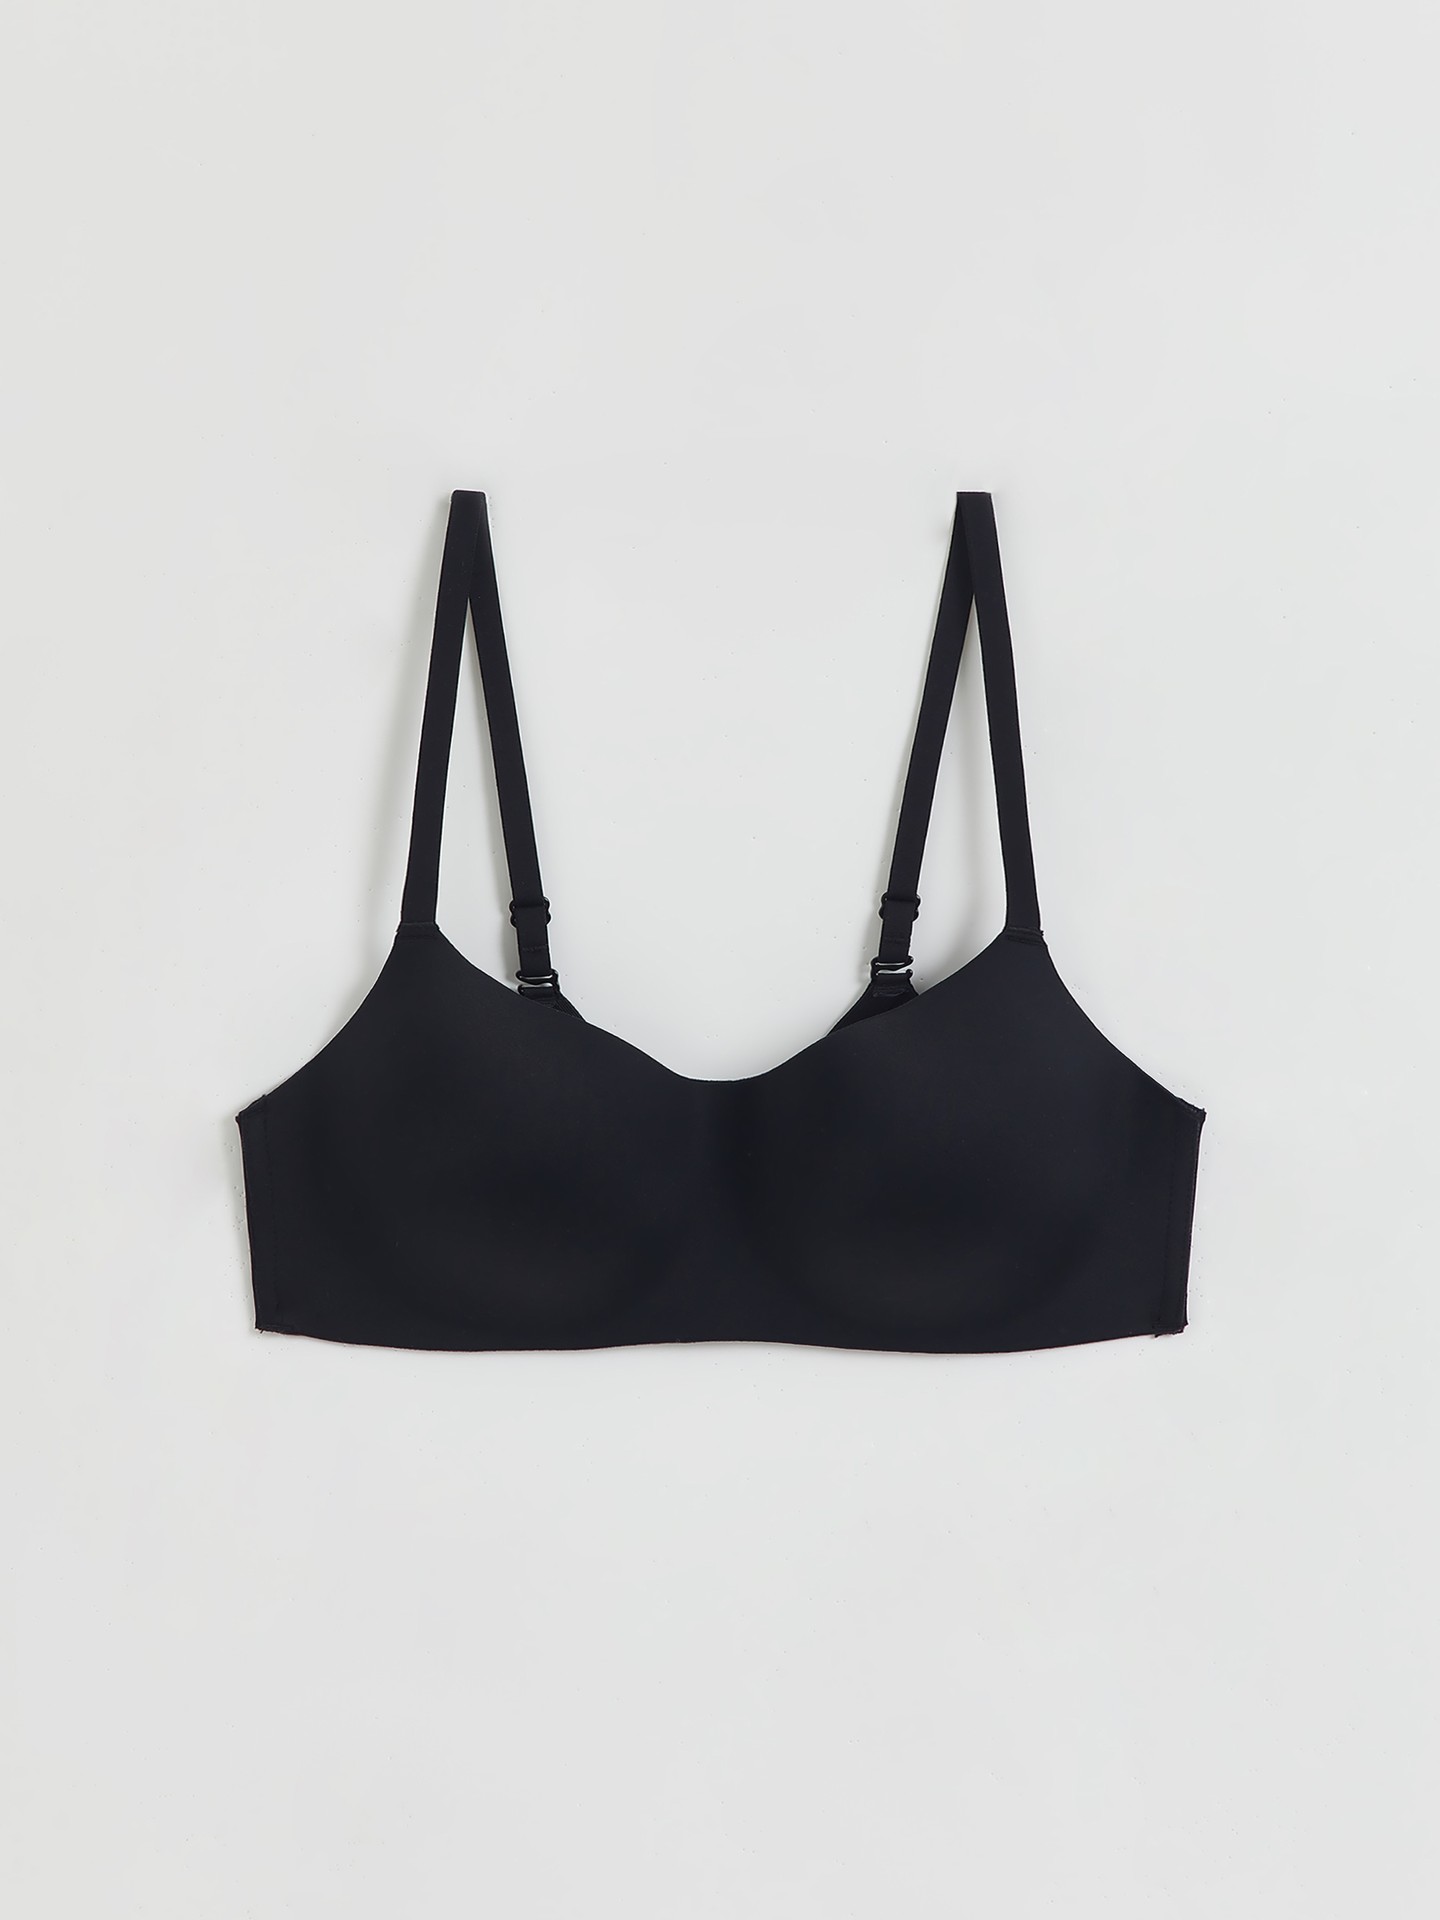 the most comfortable bras for every day 🤍🔗 @urbanic_in Comment “Link” to  get it link in your DM 🤍 #brahaul #urbanic #foryo